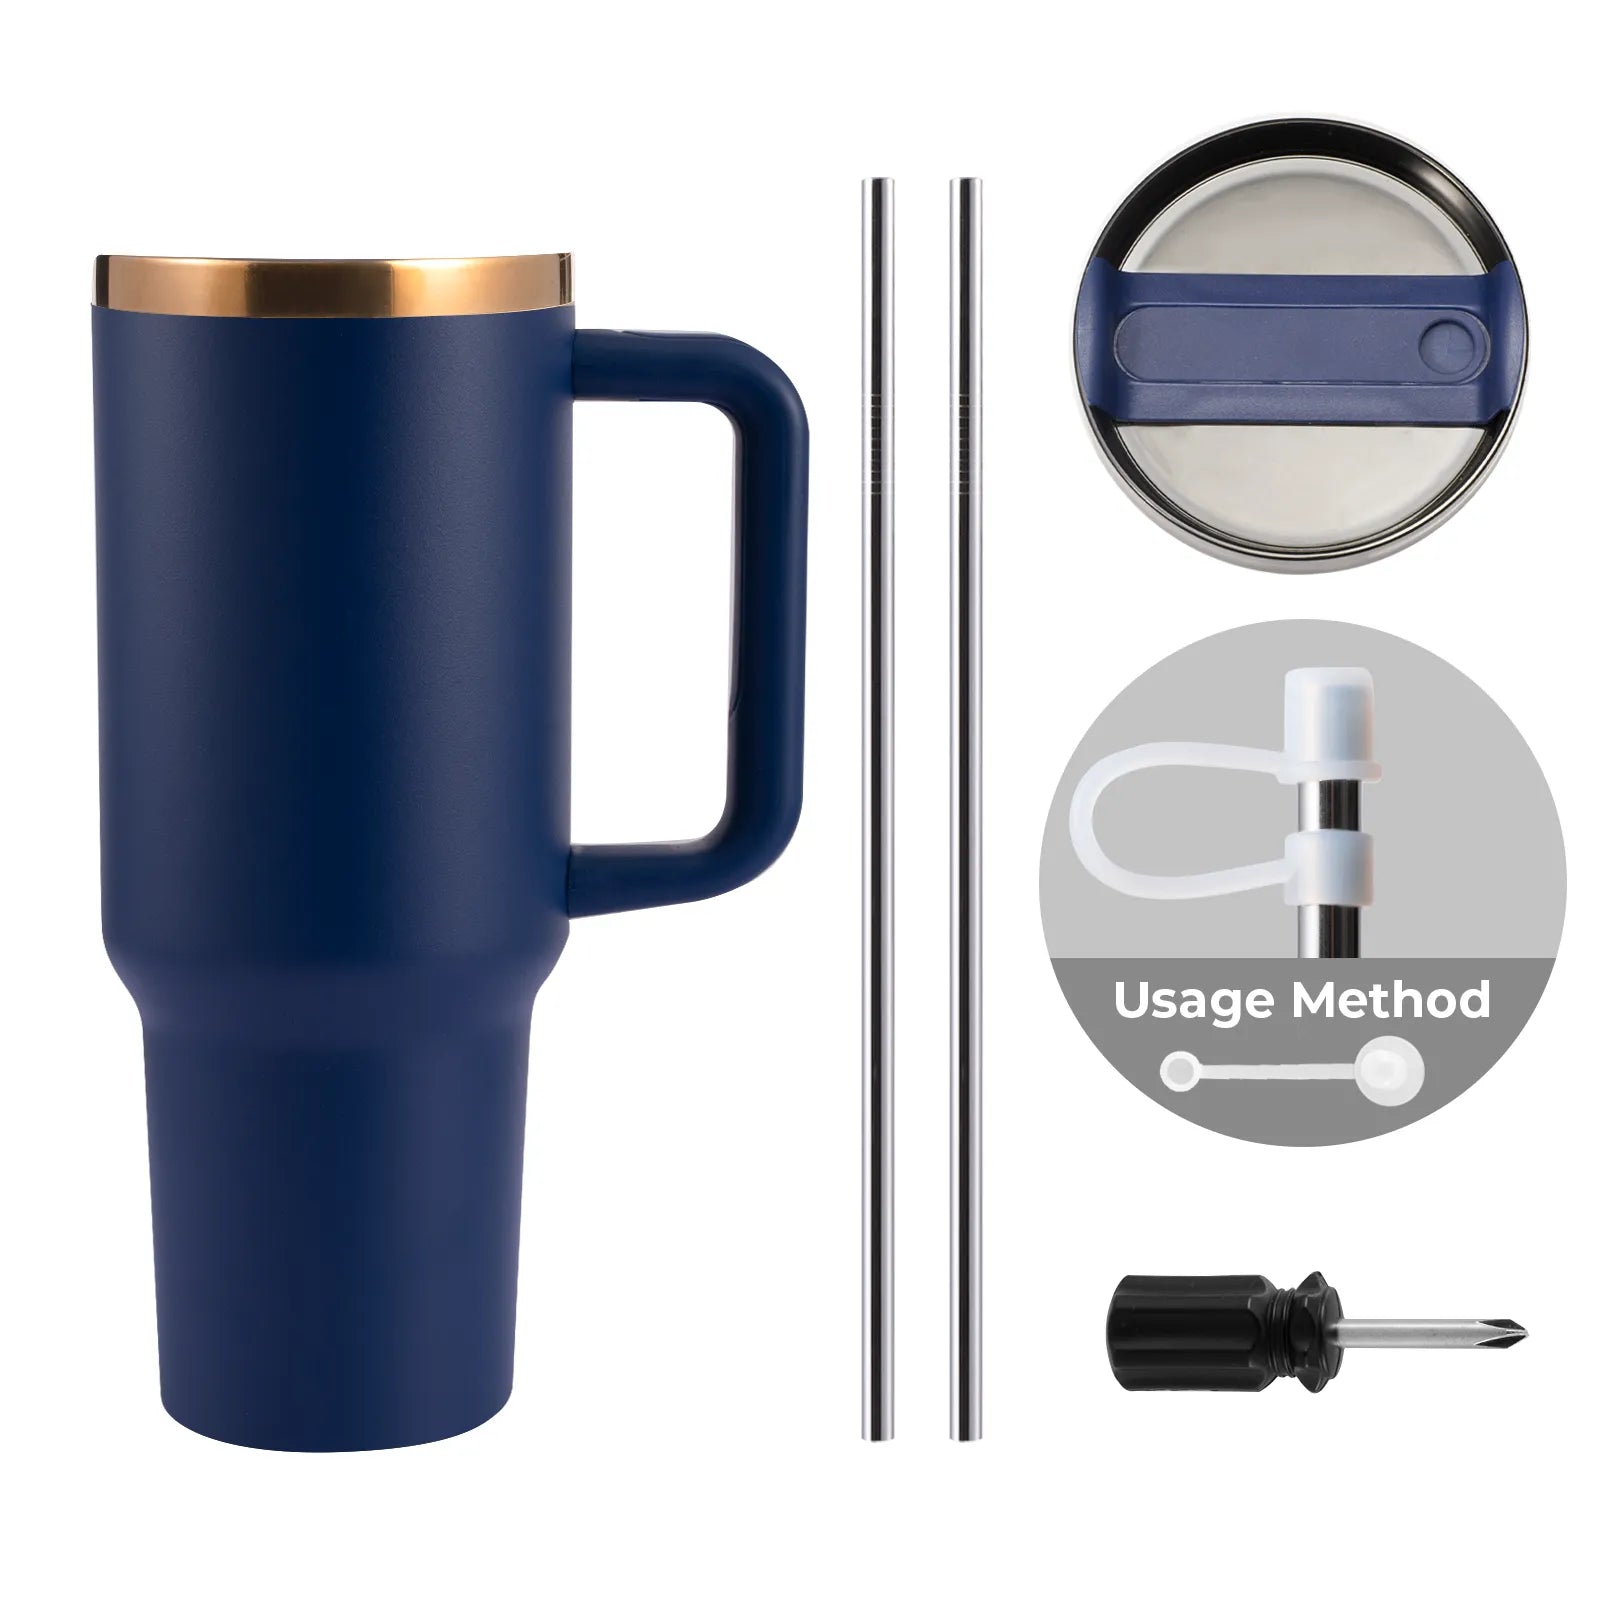 Stainless Steel Tumbler with Removable Handle (40oz)